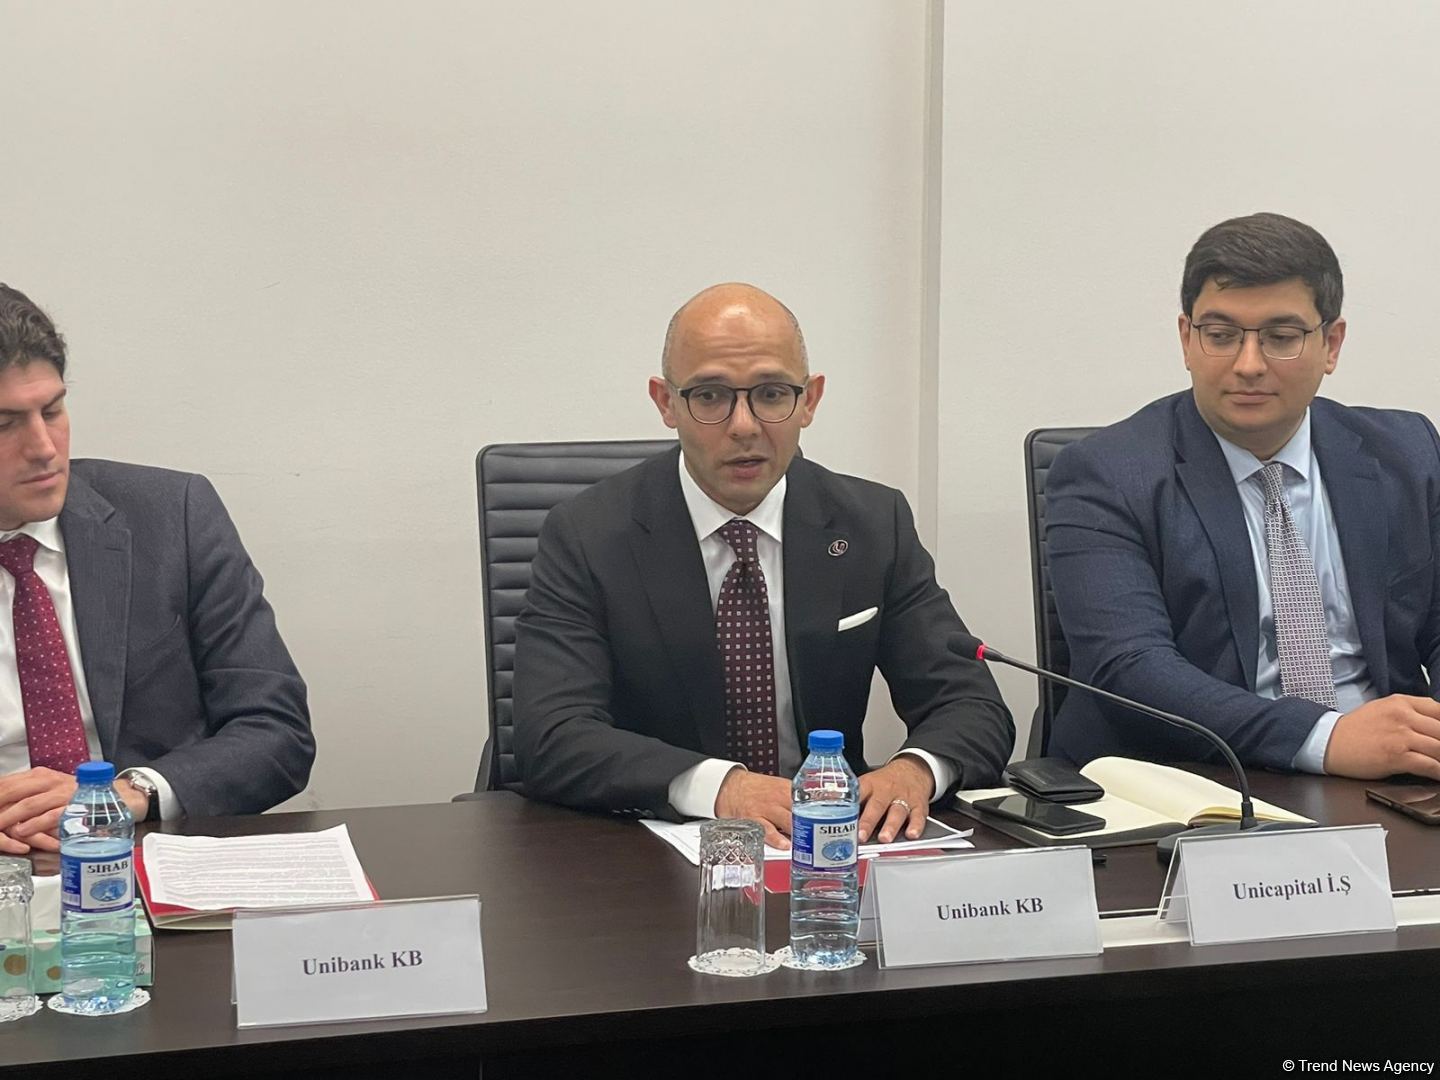 Investment activity attracts increasing interest in Azerbaijan - Unicapital